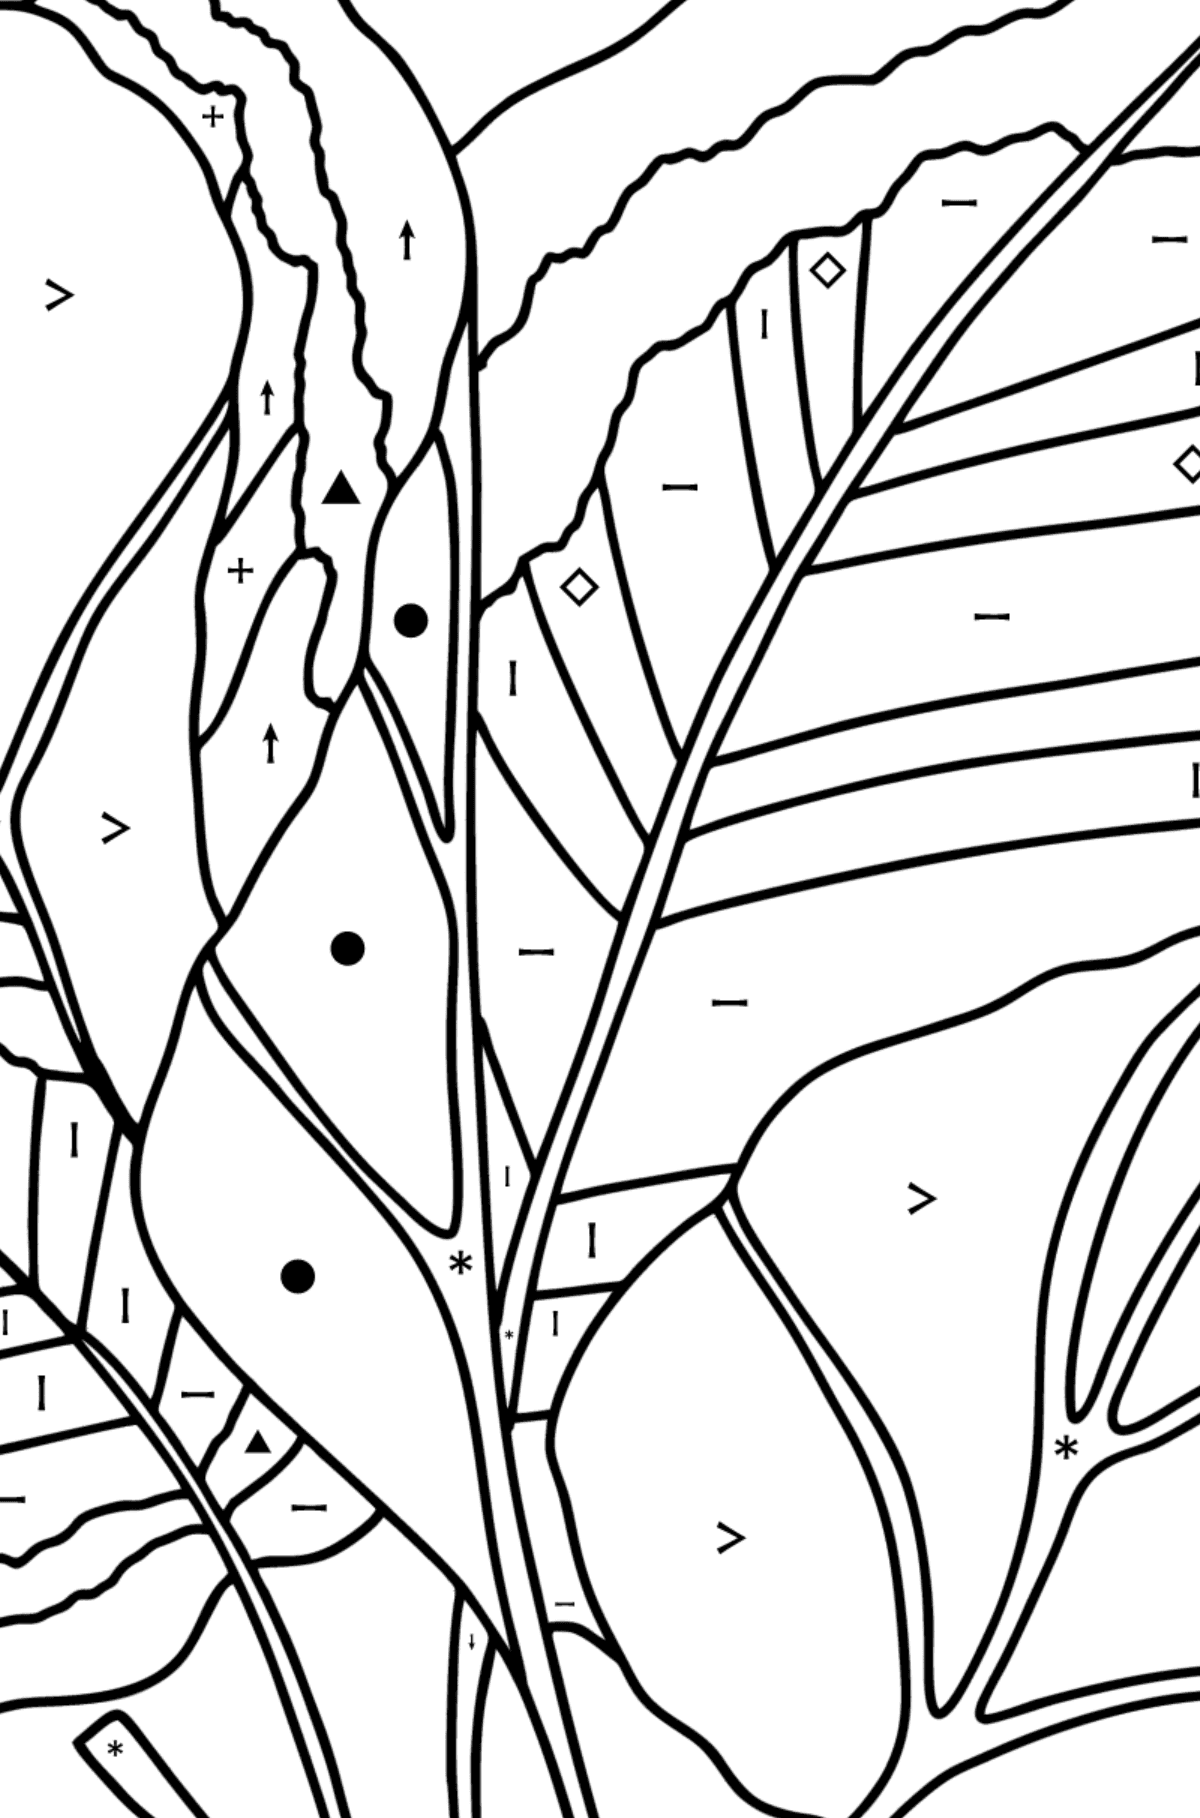 Arrowroot coloring page - Coloring by Symbols for Kids